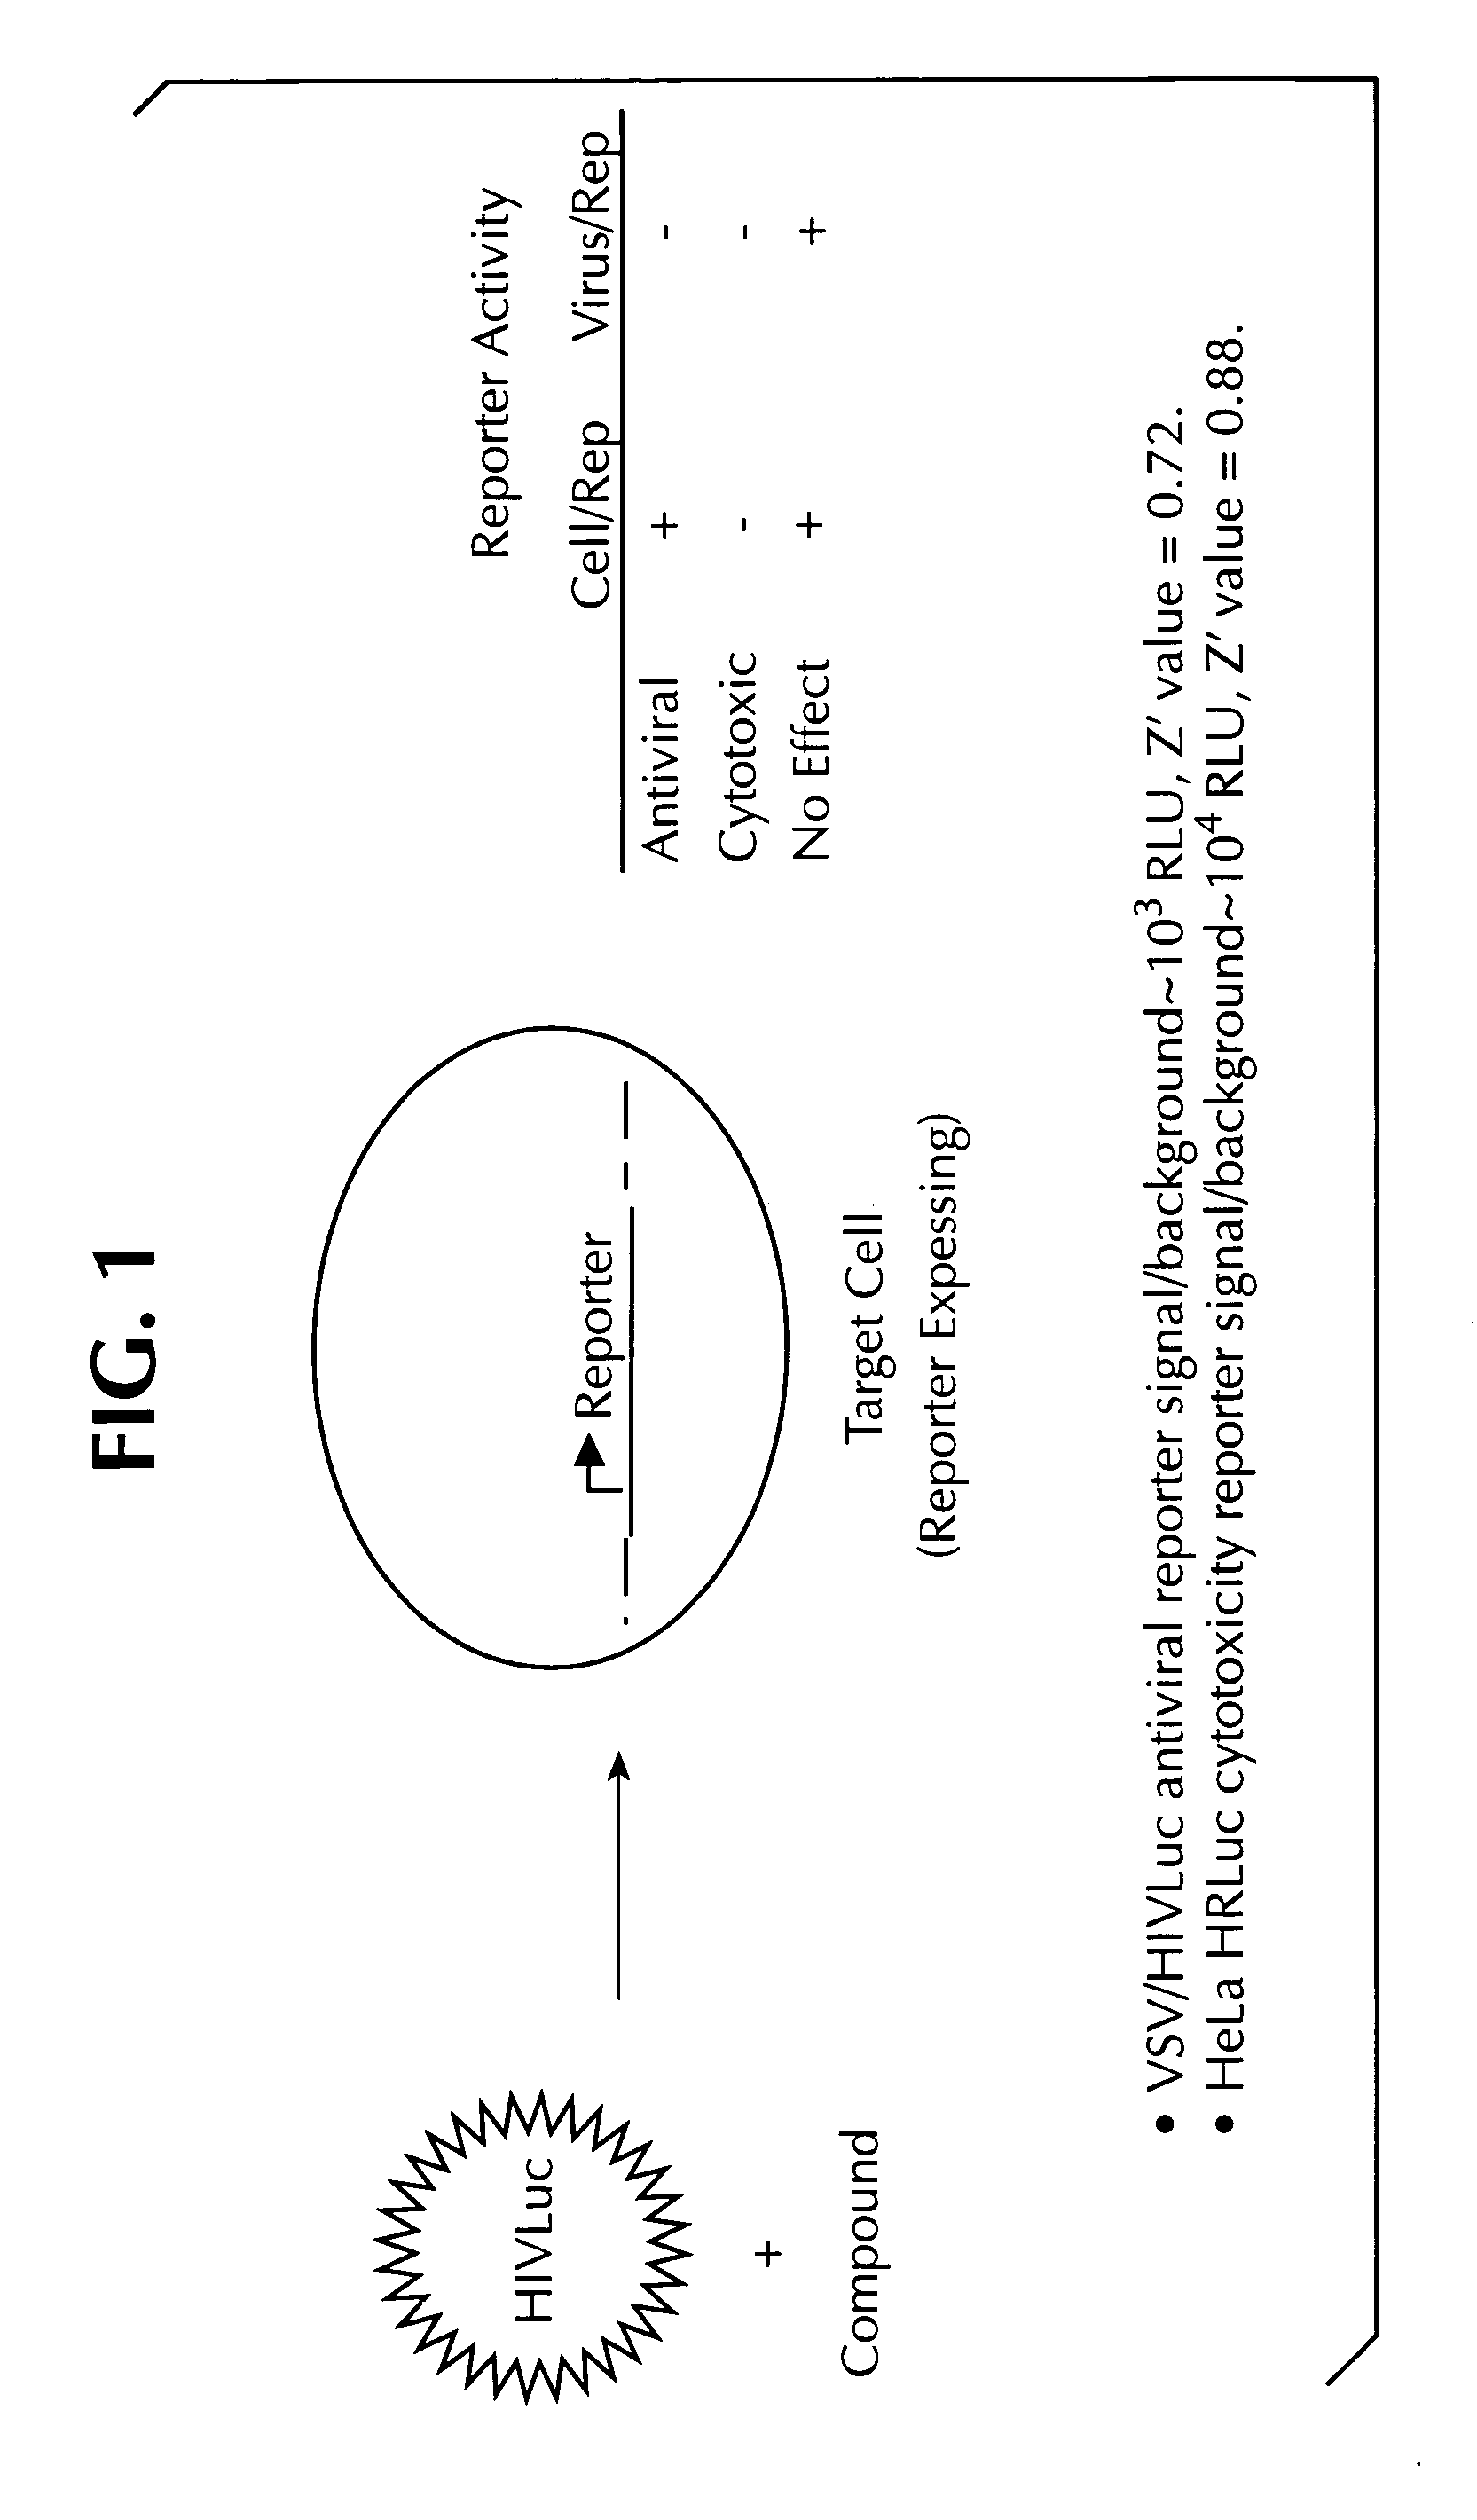 Dual assay for evaluating activity and cytotoxicity of compounds in the same population of cells